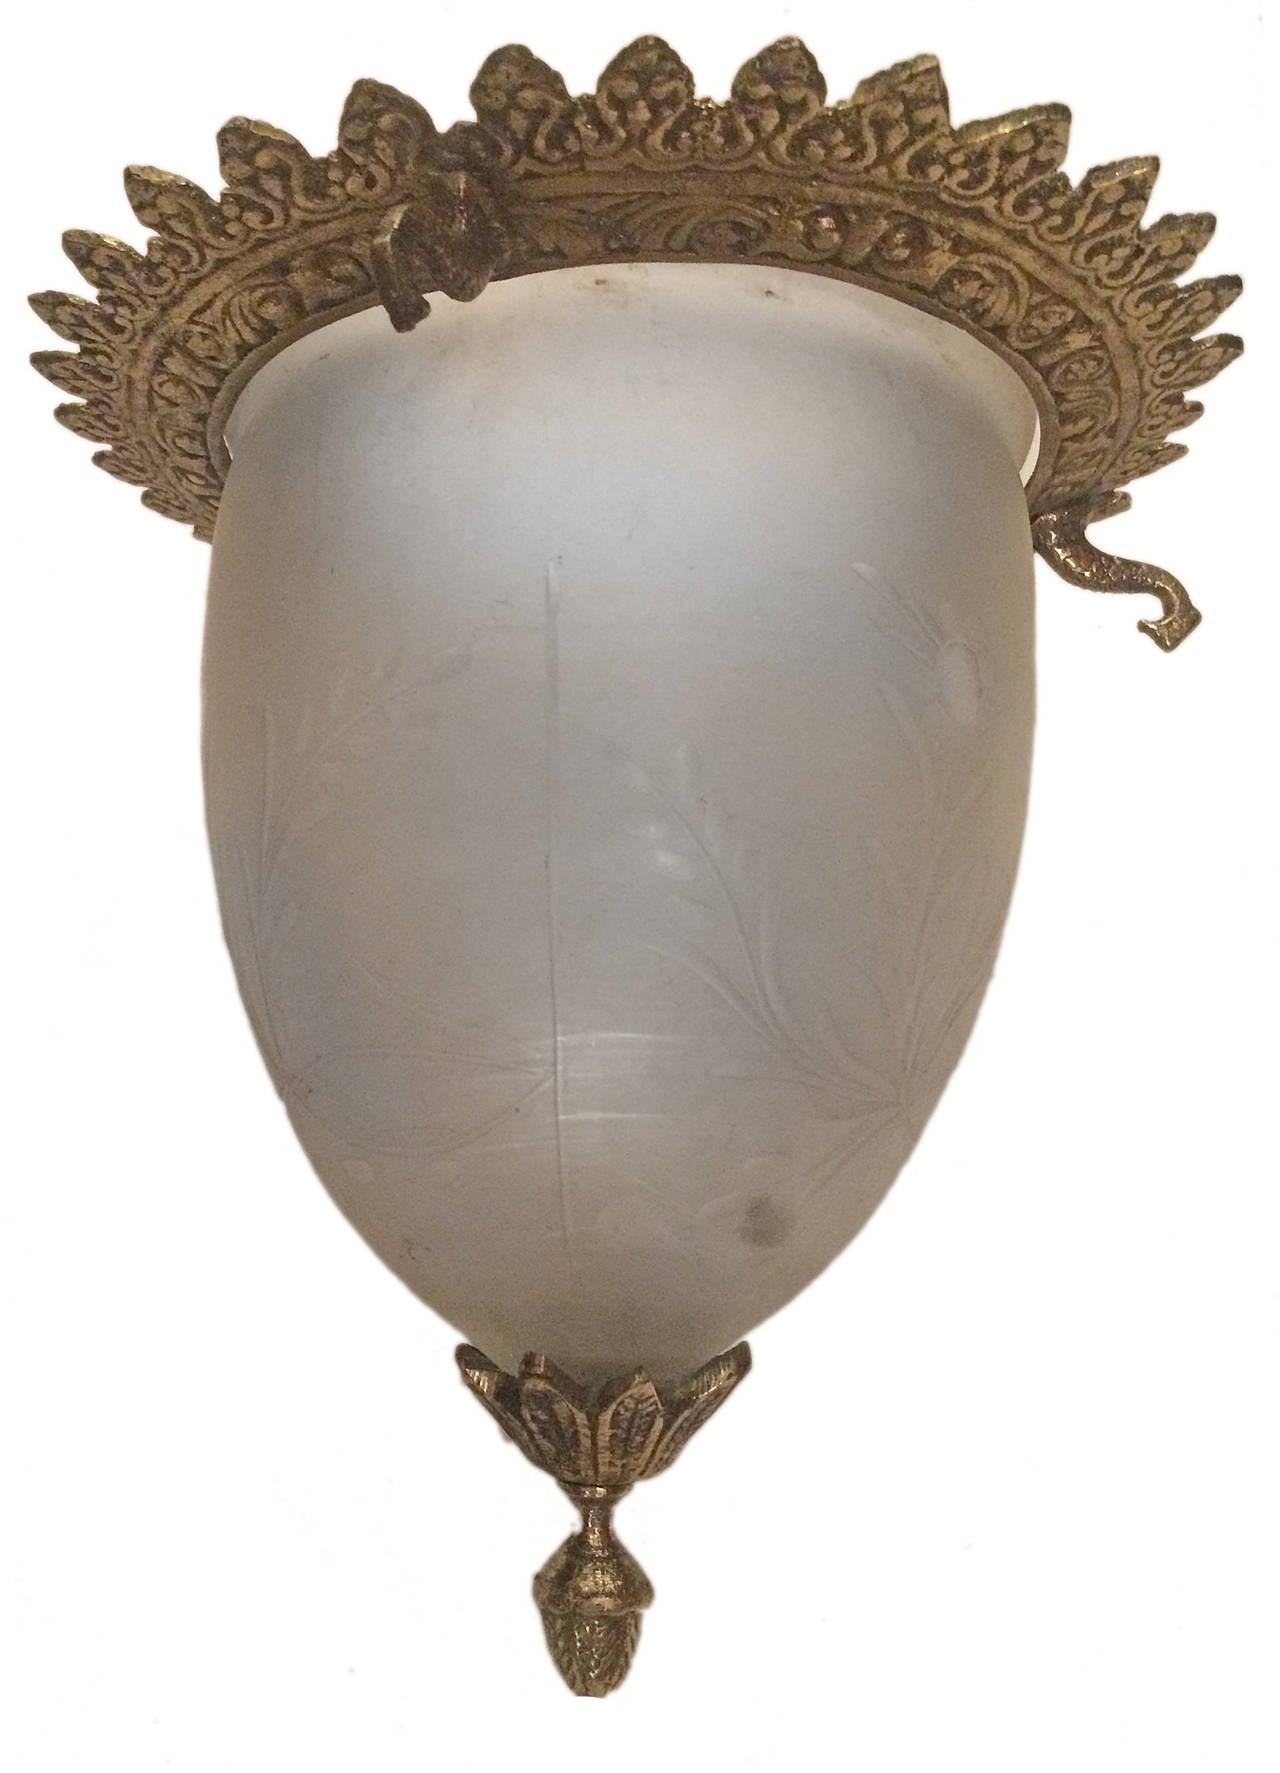 An Italian etched glass lantern with brass fittings, circa 1930. Foliage details on body. Mounted with three chains. 

Measurements:
10